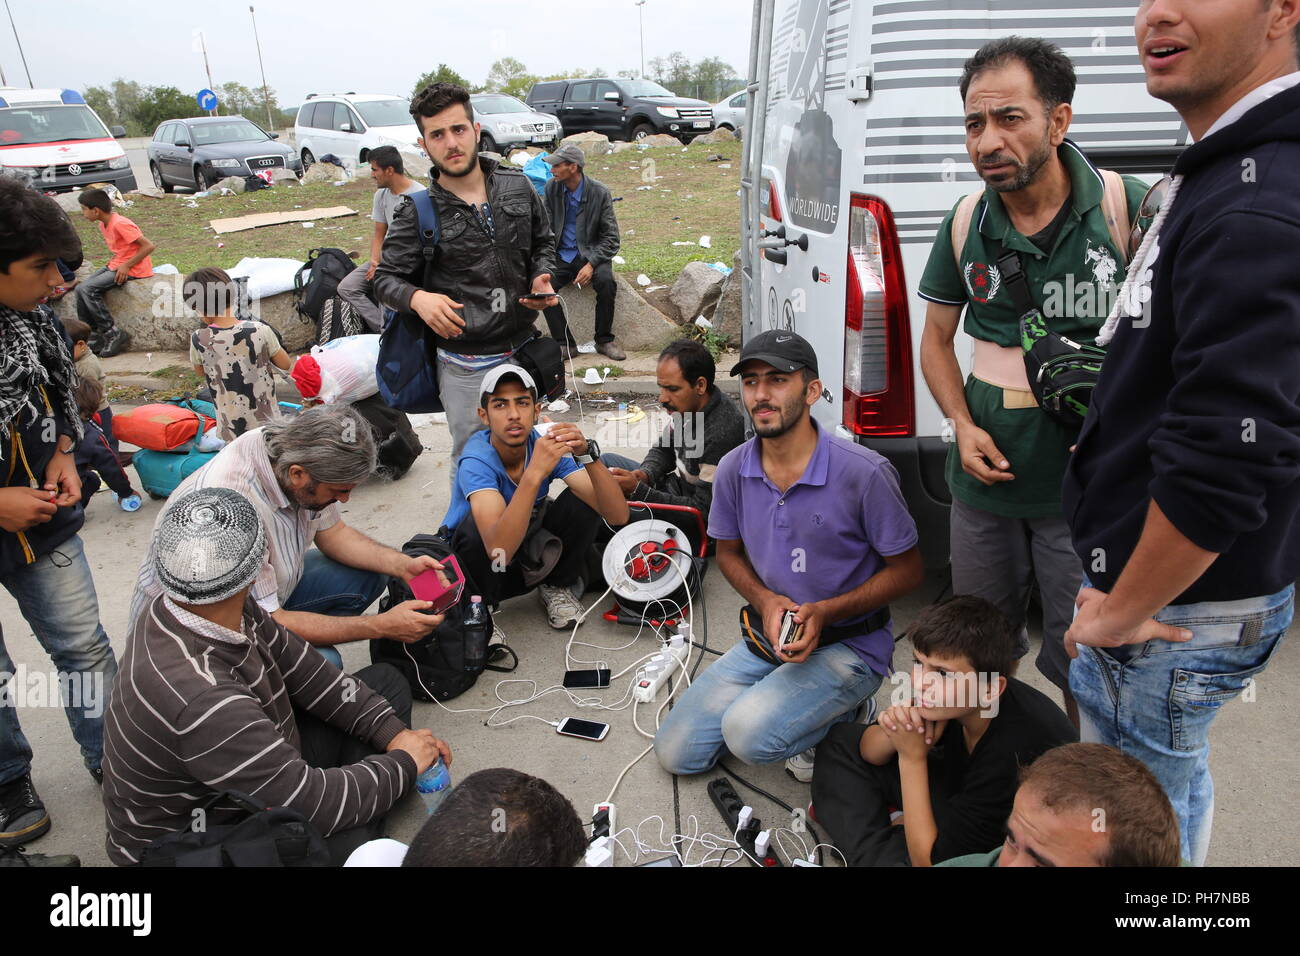 Nickelsdorf, Burgenland, Austria. 15th Sep, 2015. Refugees seen resting on the ground.The Austrian military took control of managing arriving Refugees at the Austrian/Slovenian border Crossing Spielfeld. They were supported by the Christian NGO Caritas. The refugees were mostly from Syria, Afghanistan and Iraq. Credit: Stanislav Jenis/SOPA Images/ZUMA Wire/Alamy Live News Stock Photo